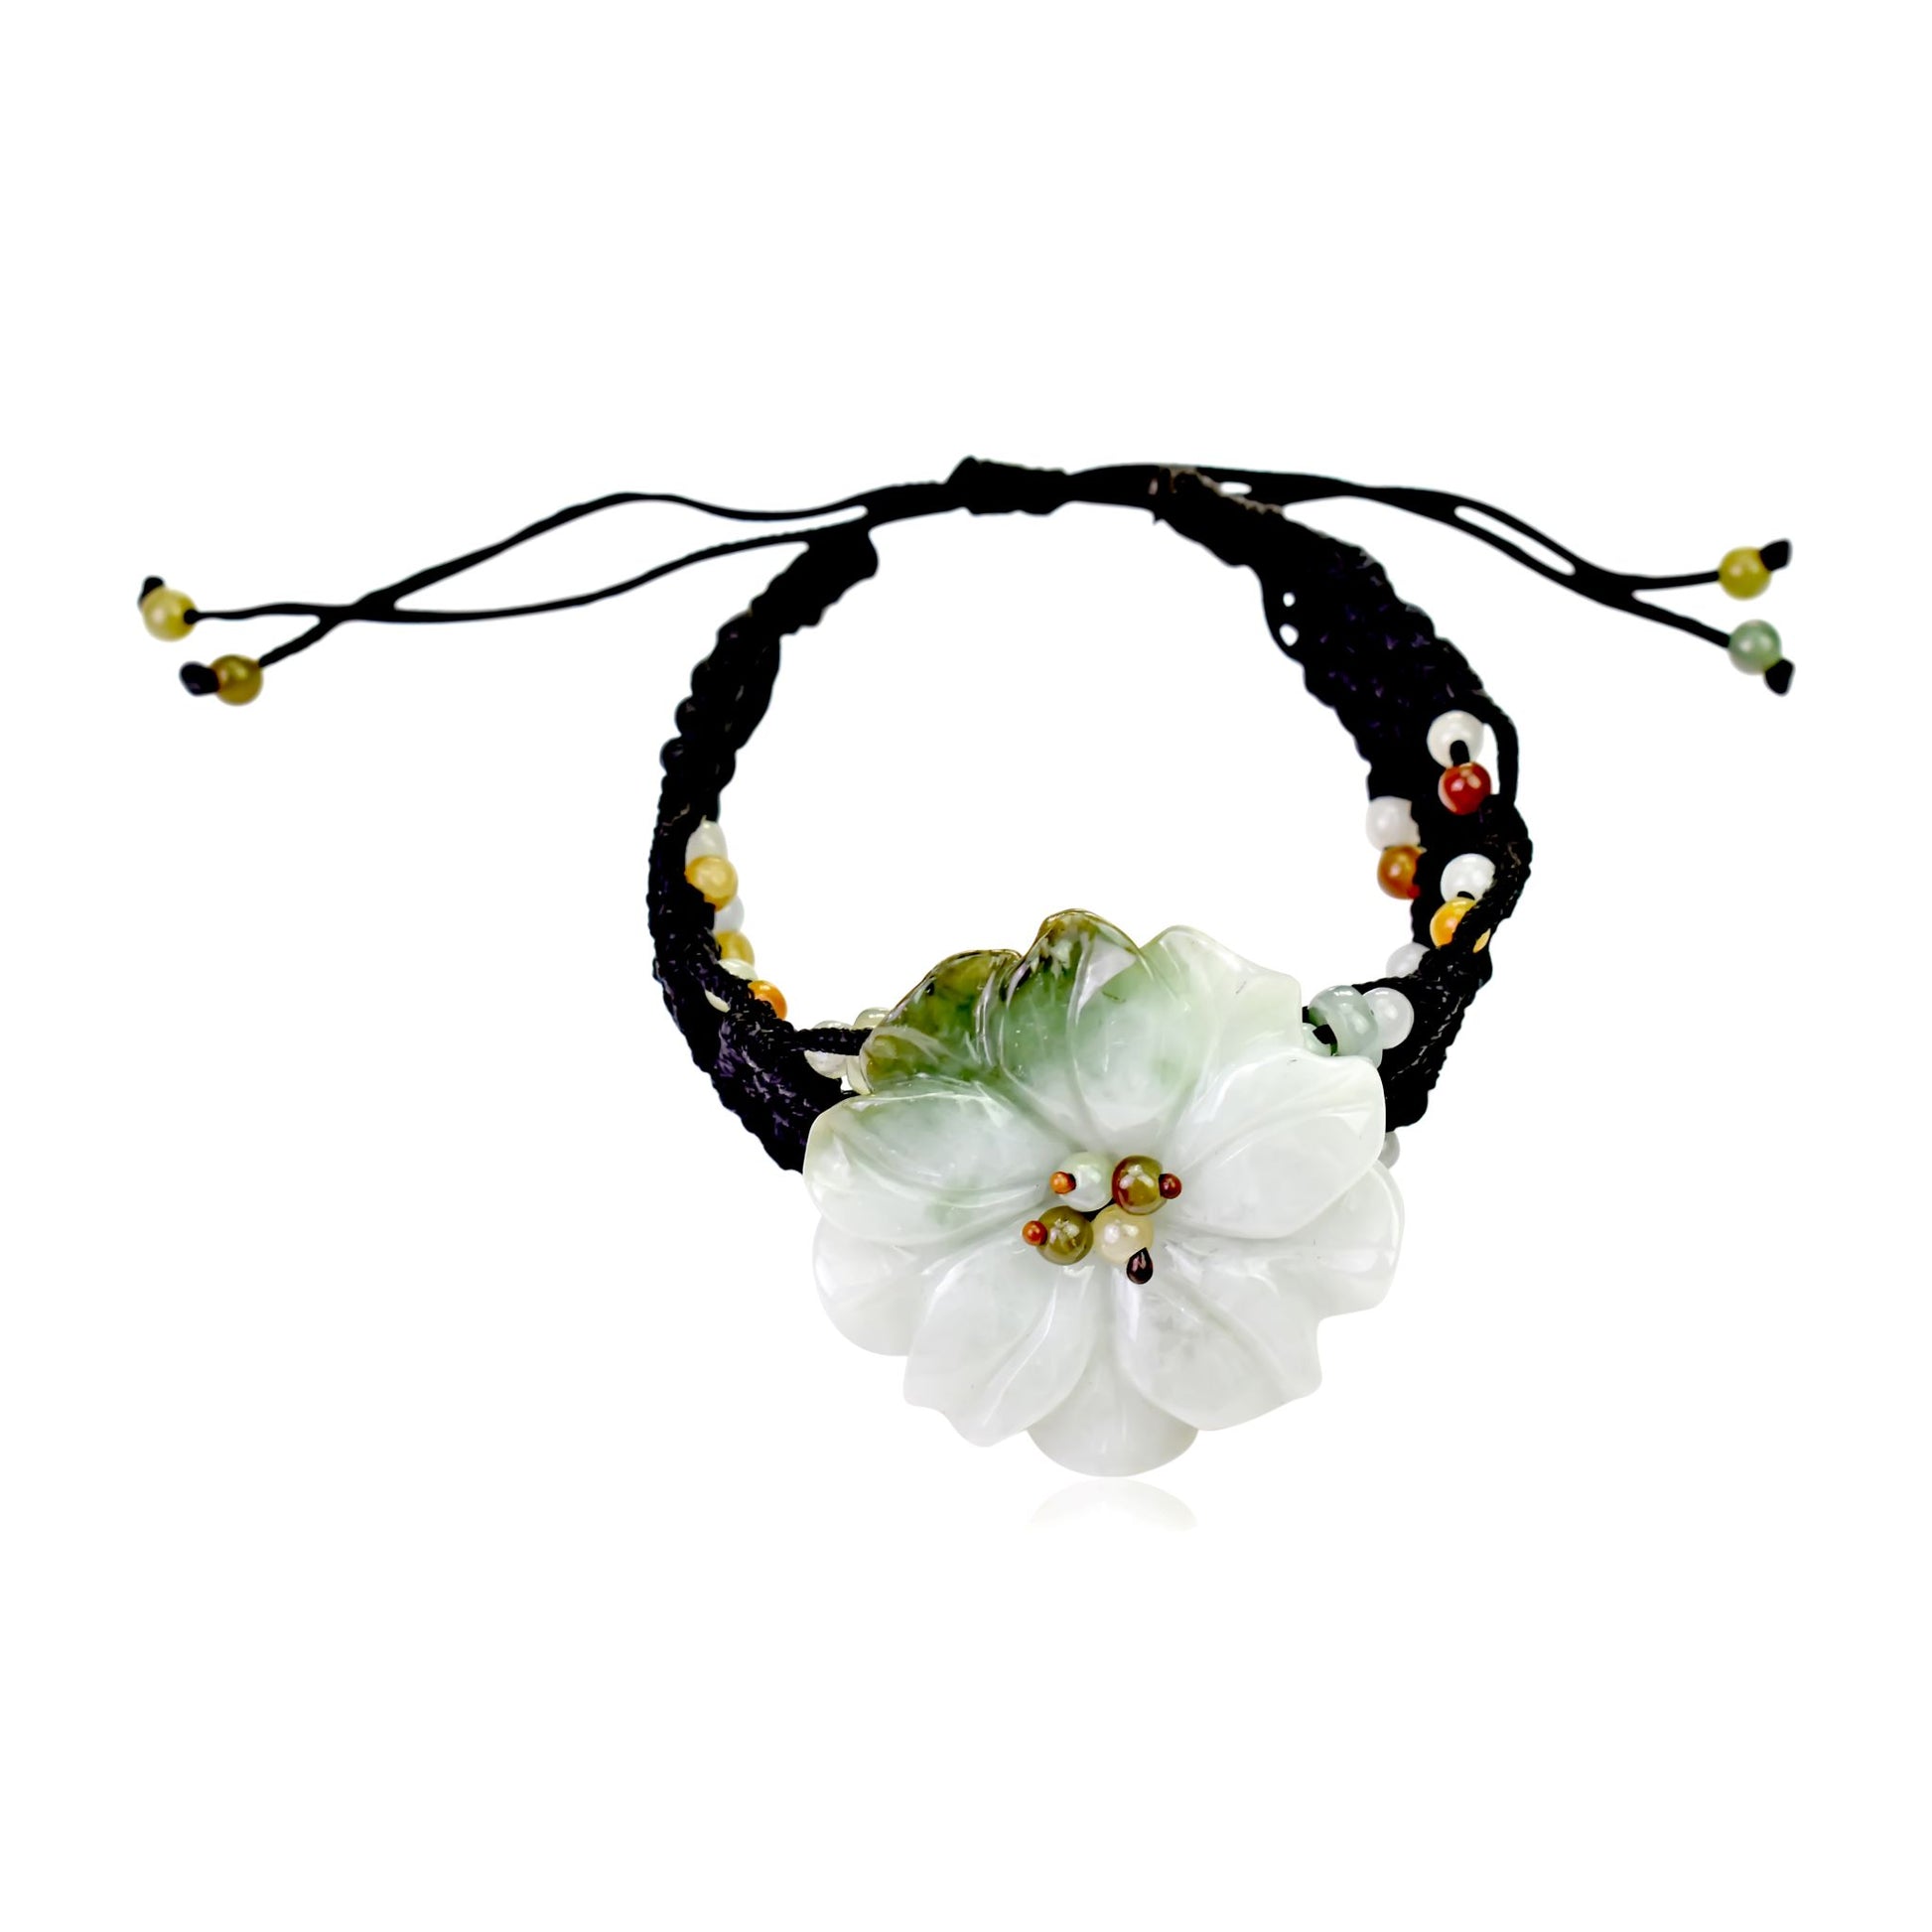 Show your Love of the Sea with Anemone Flower Bracelet made with Black Cord